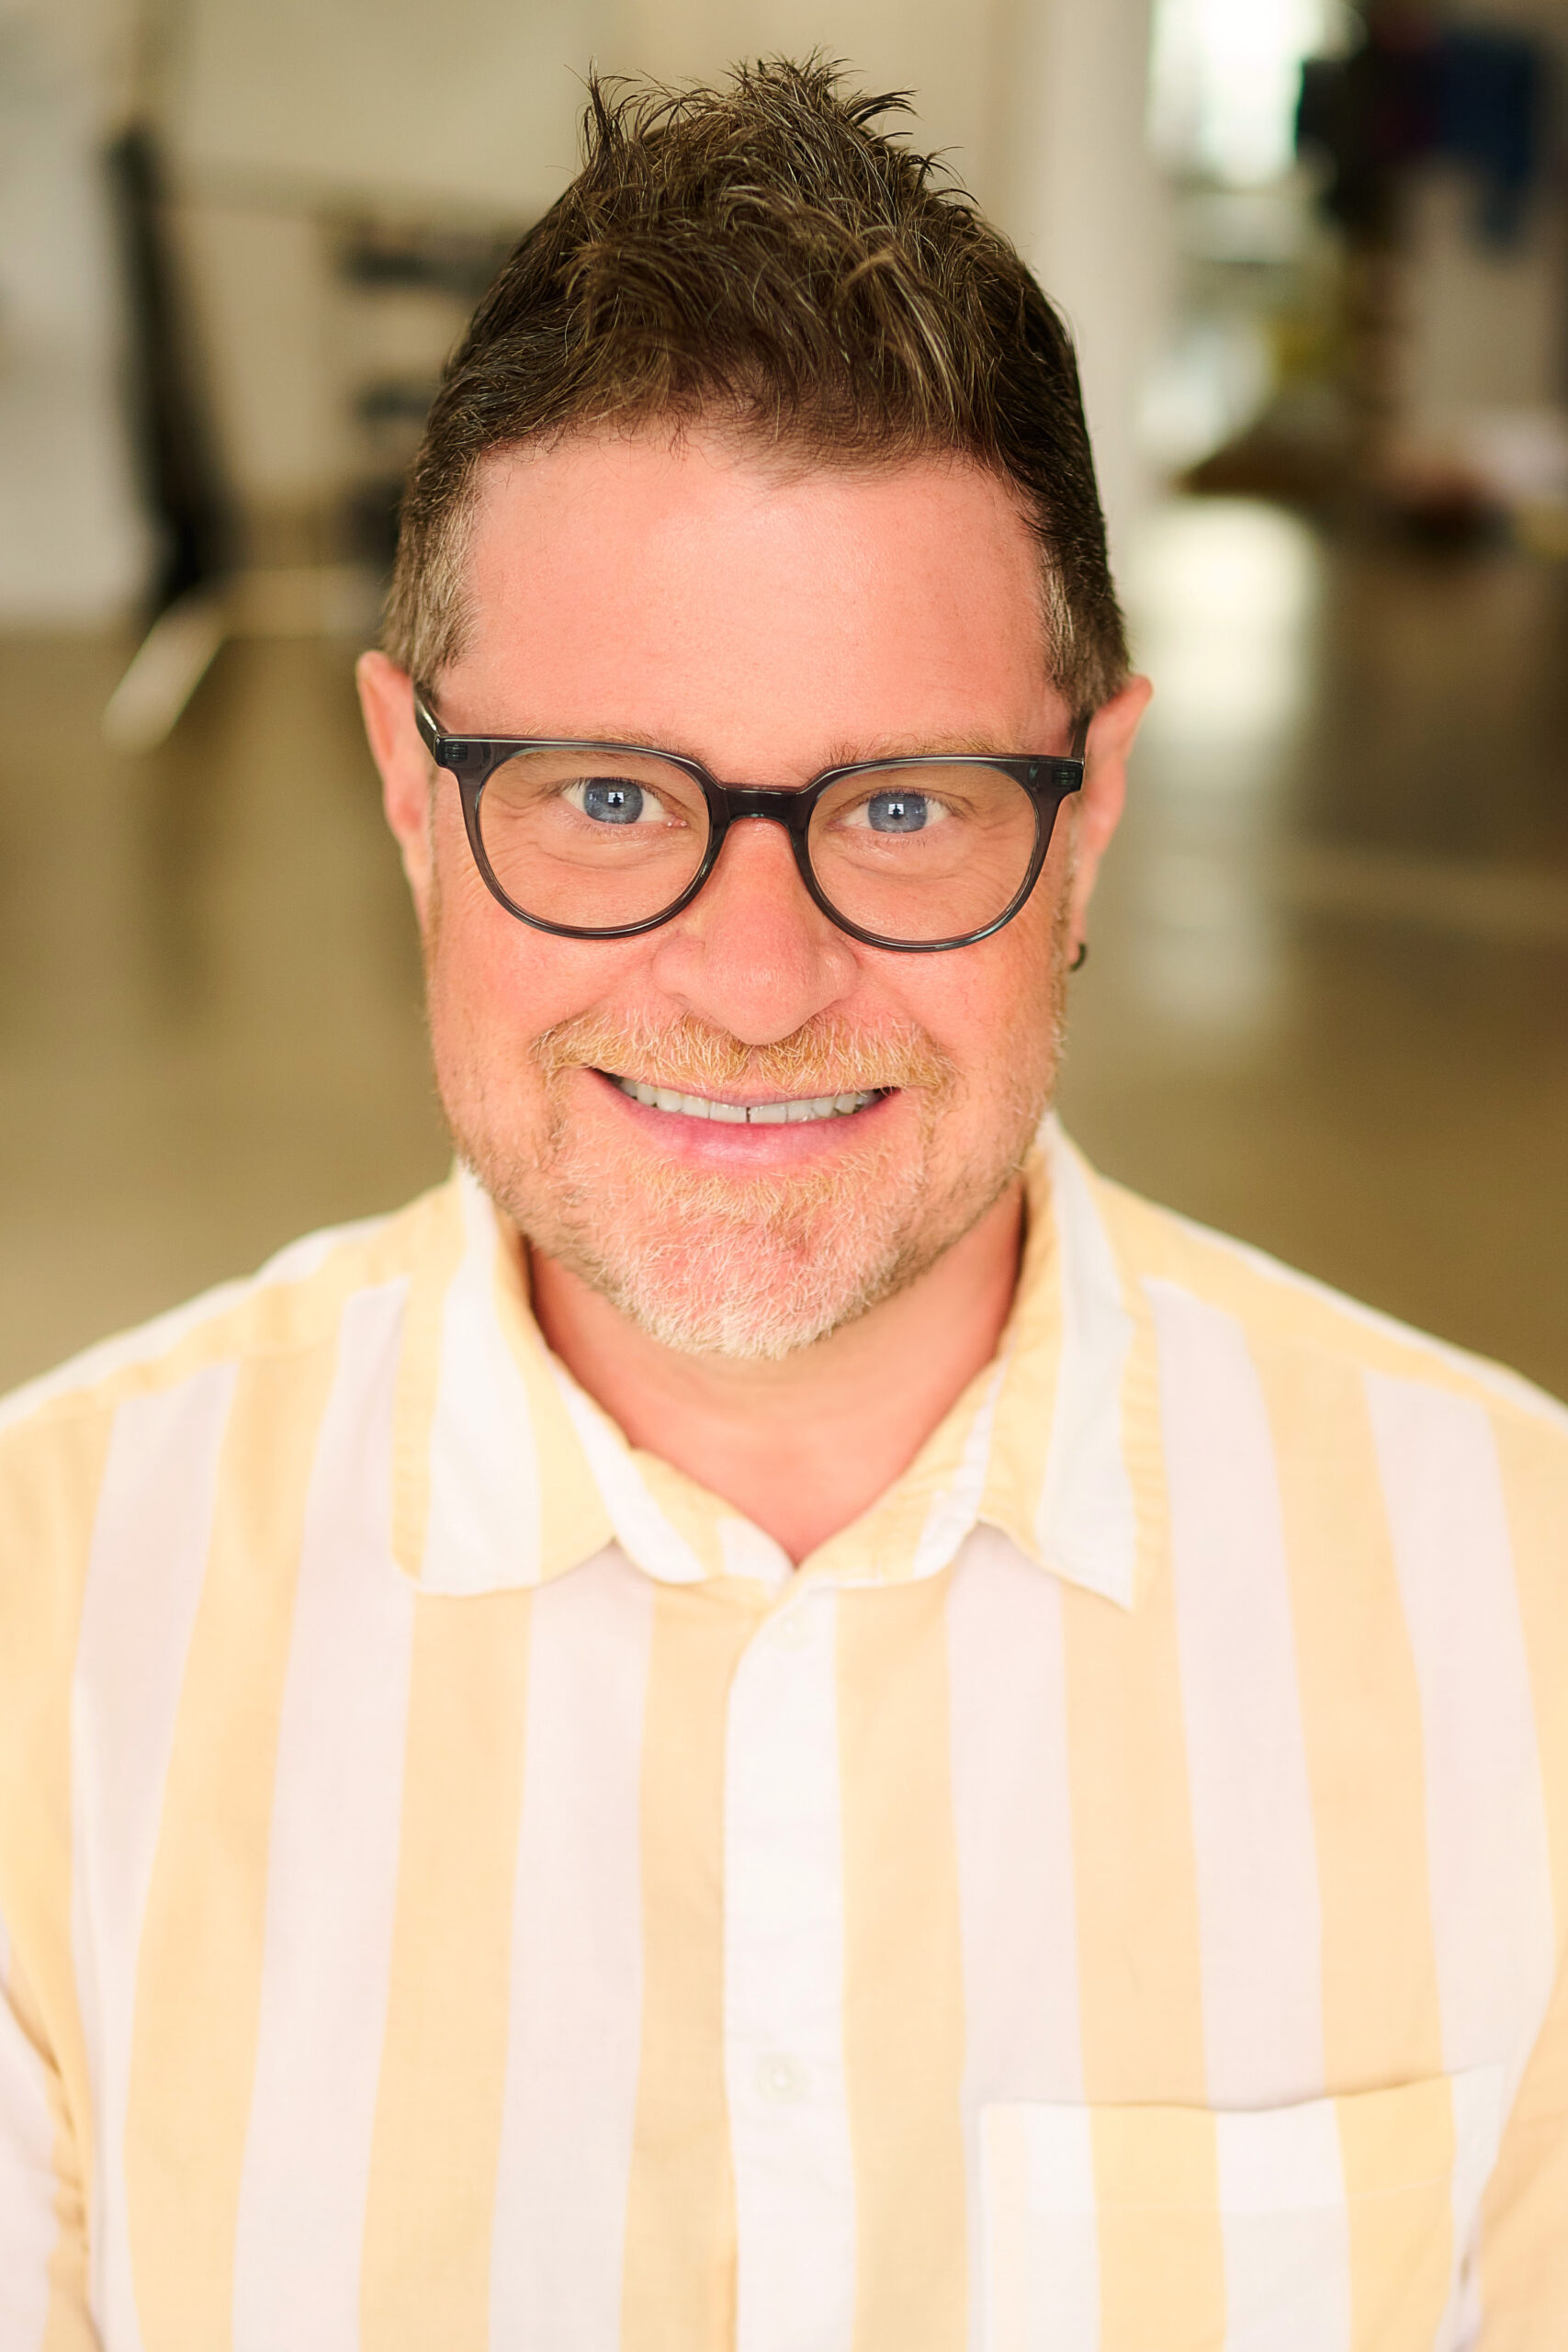 This is a head shot of Craig Thomas, real estate agent in Los Angeles Ca. wearing his glasses and a yellow stripped shirt.